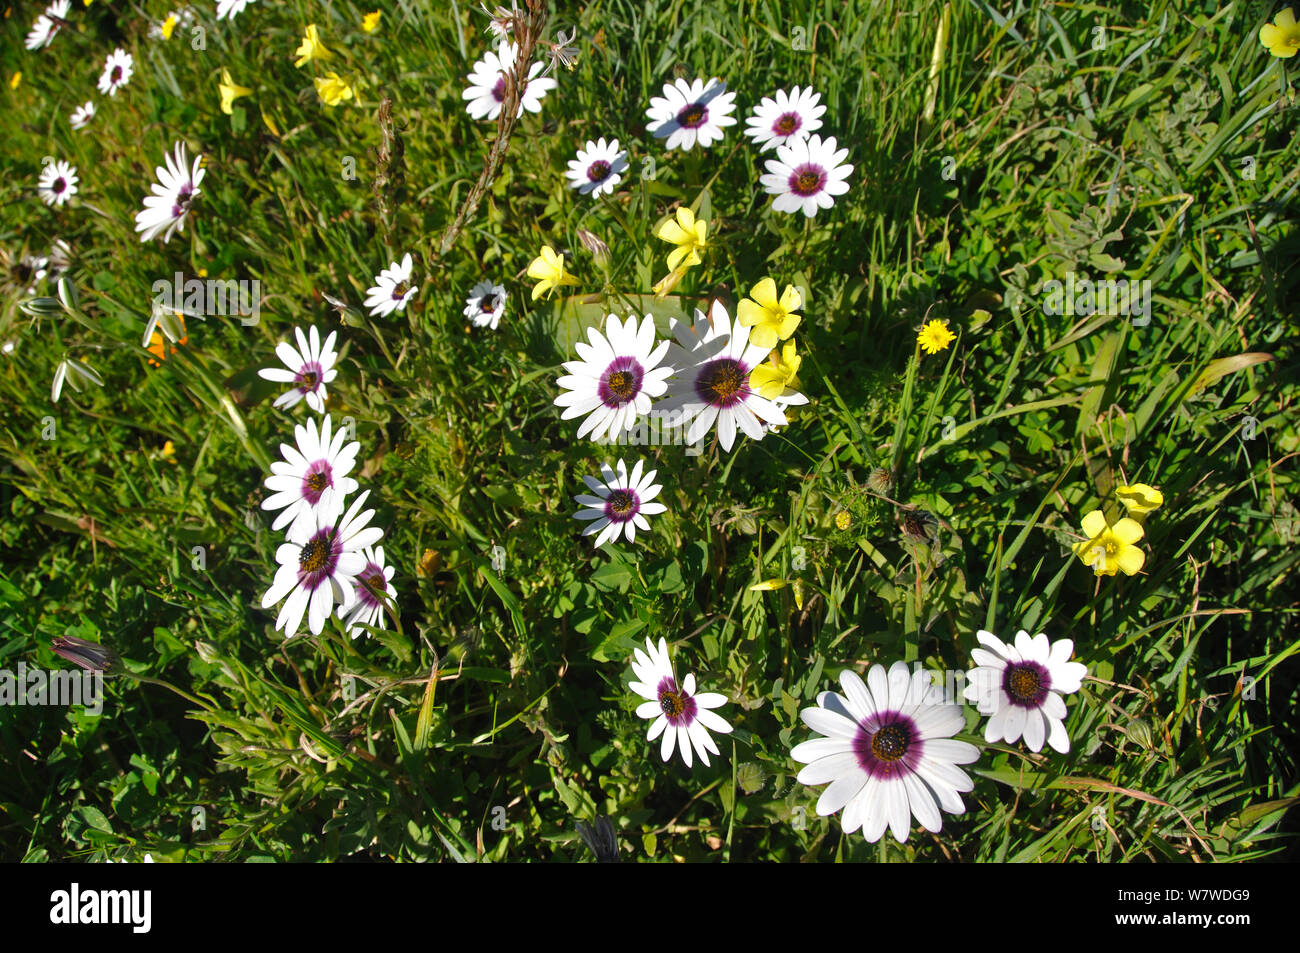 White Namaqualand / Cape daisies (Dimorphotheca pluvialis) and other species in flower, West Coast National park, Western Cape, South Africa, August. Stock Photo